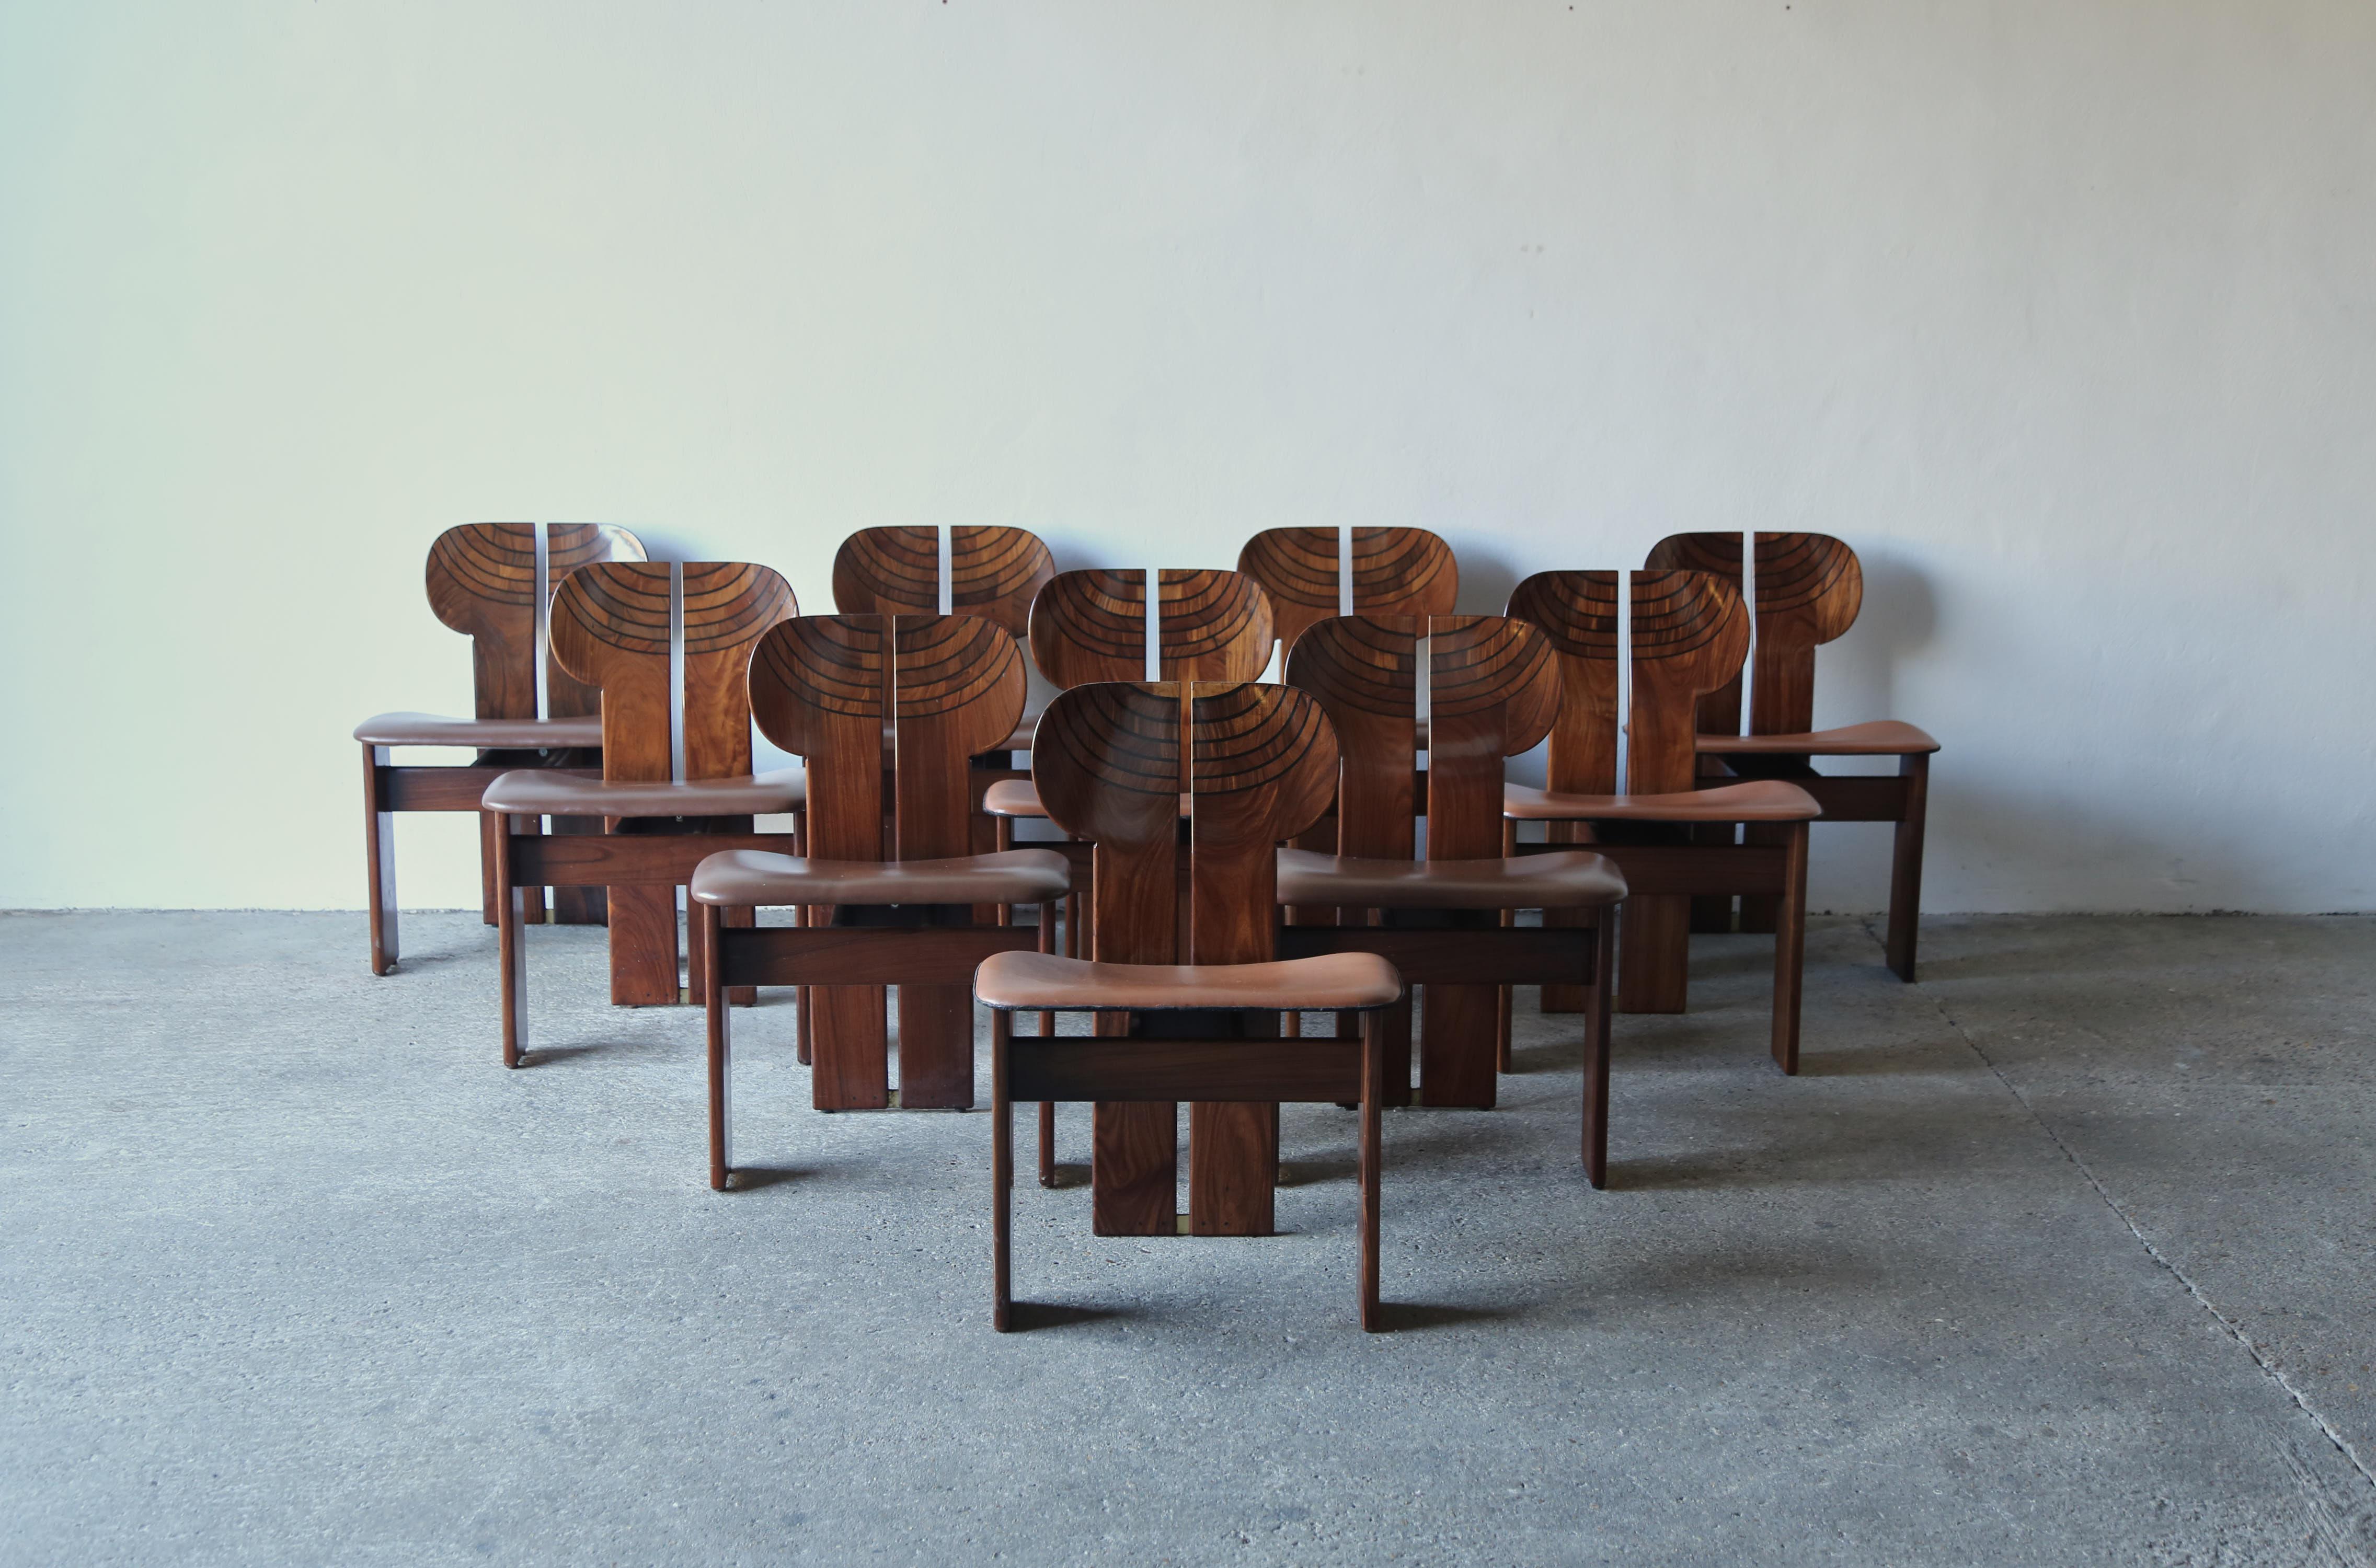 A rare set of ten stunning Africa chairs designed by Afra & Tobia Scarpa in the 1970s, and produced by Maxalto, Italy. These are great examples in rare exotic hardwood, burl, black leather and brass. Very good original condition with normal minor